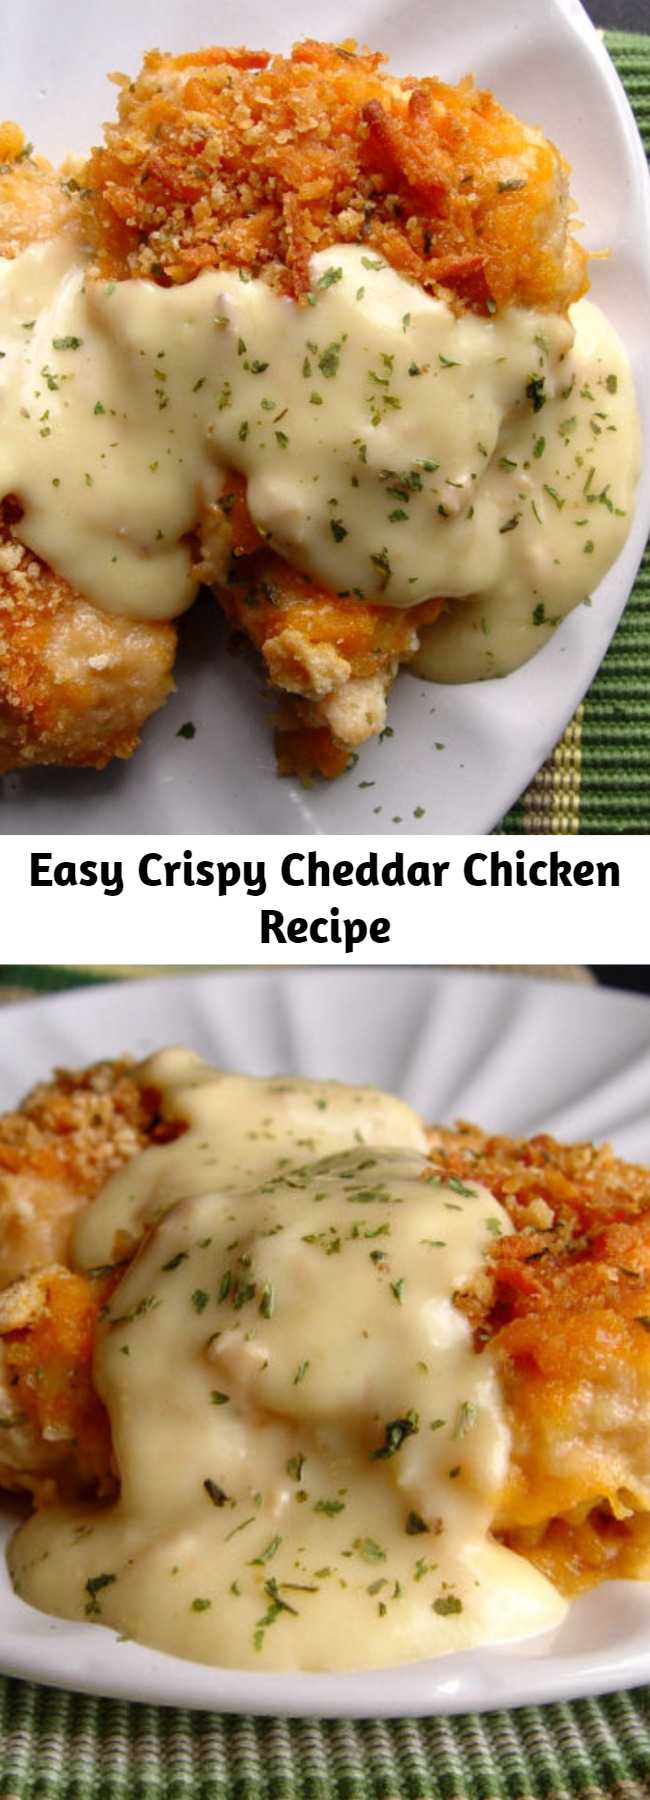 Easy Crispy Cheddar Chicken Recipe - I have a simple dinner recipe for you today. Simple and easy and tasty and smile provoking…an all around treasure. #crispychicken #chickendinner #bestchickenrecipes